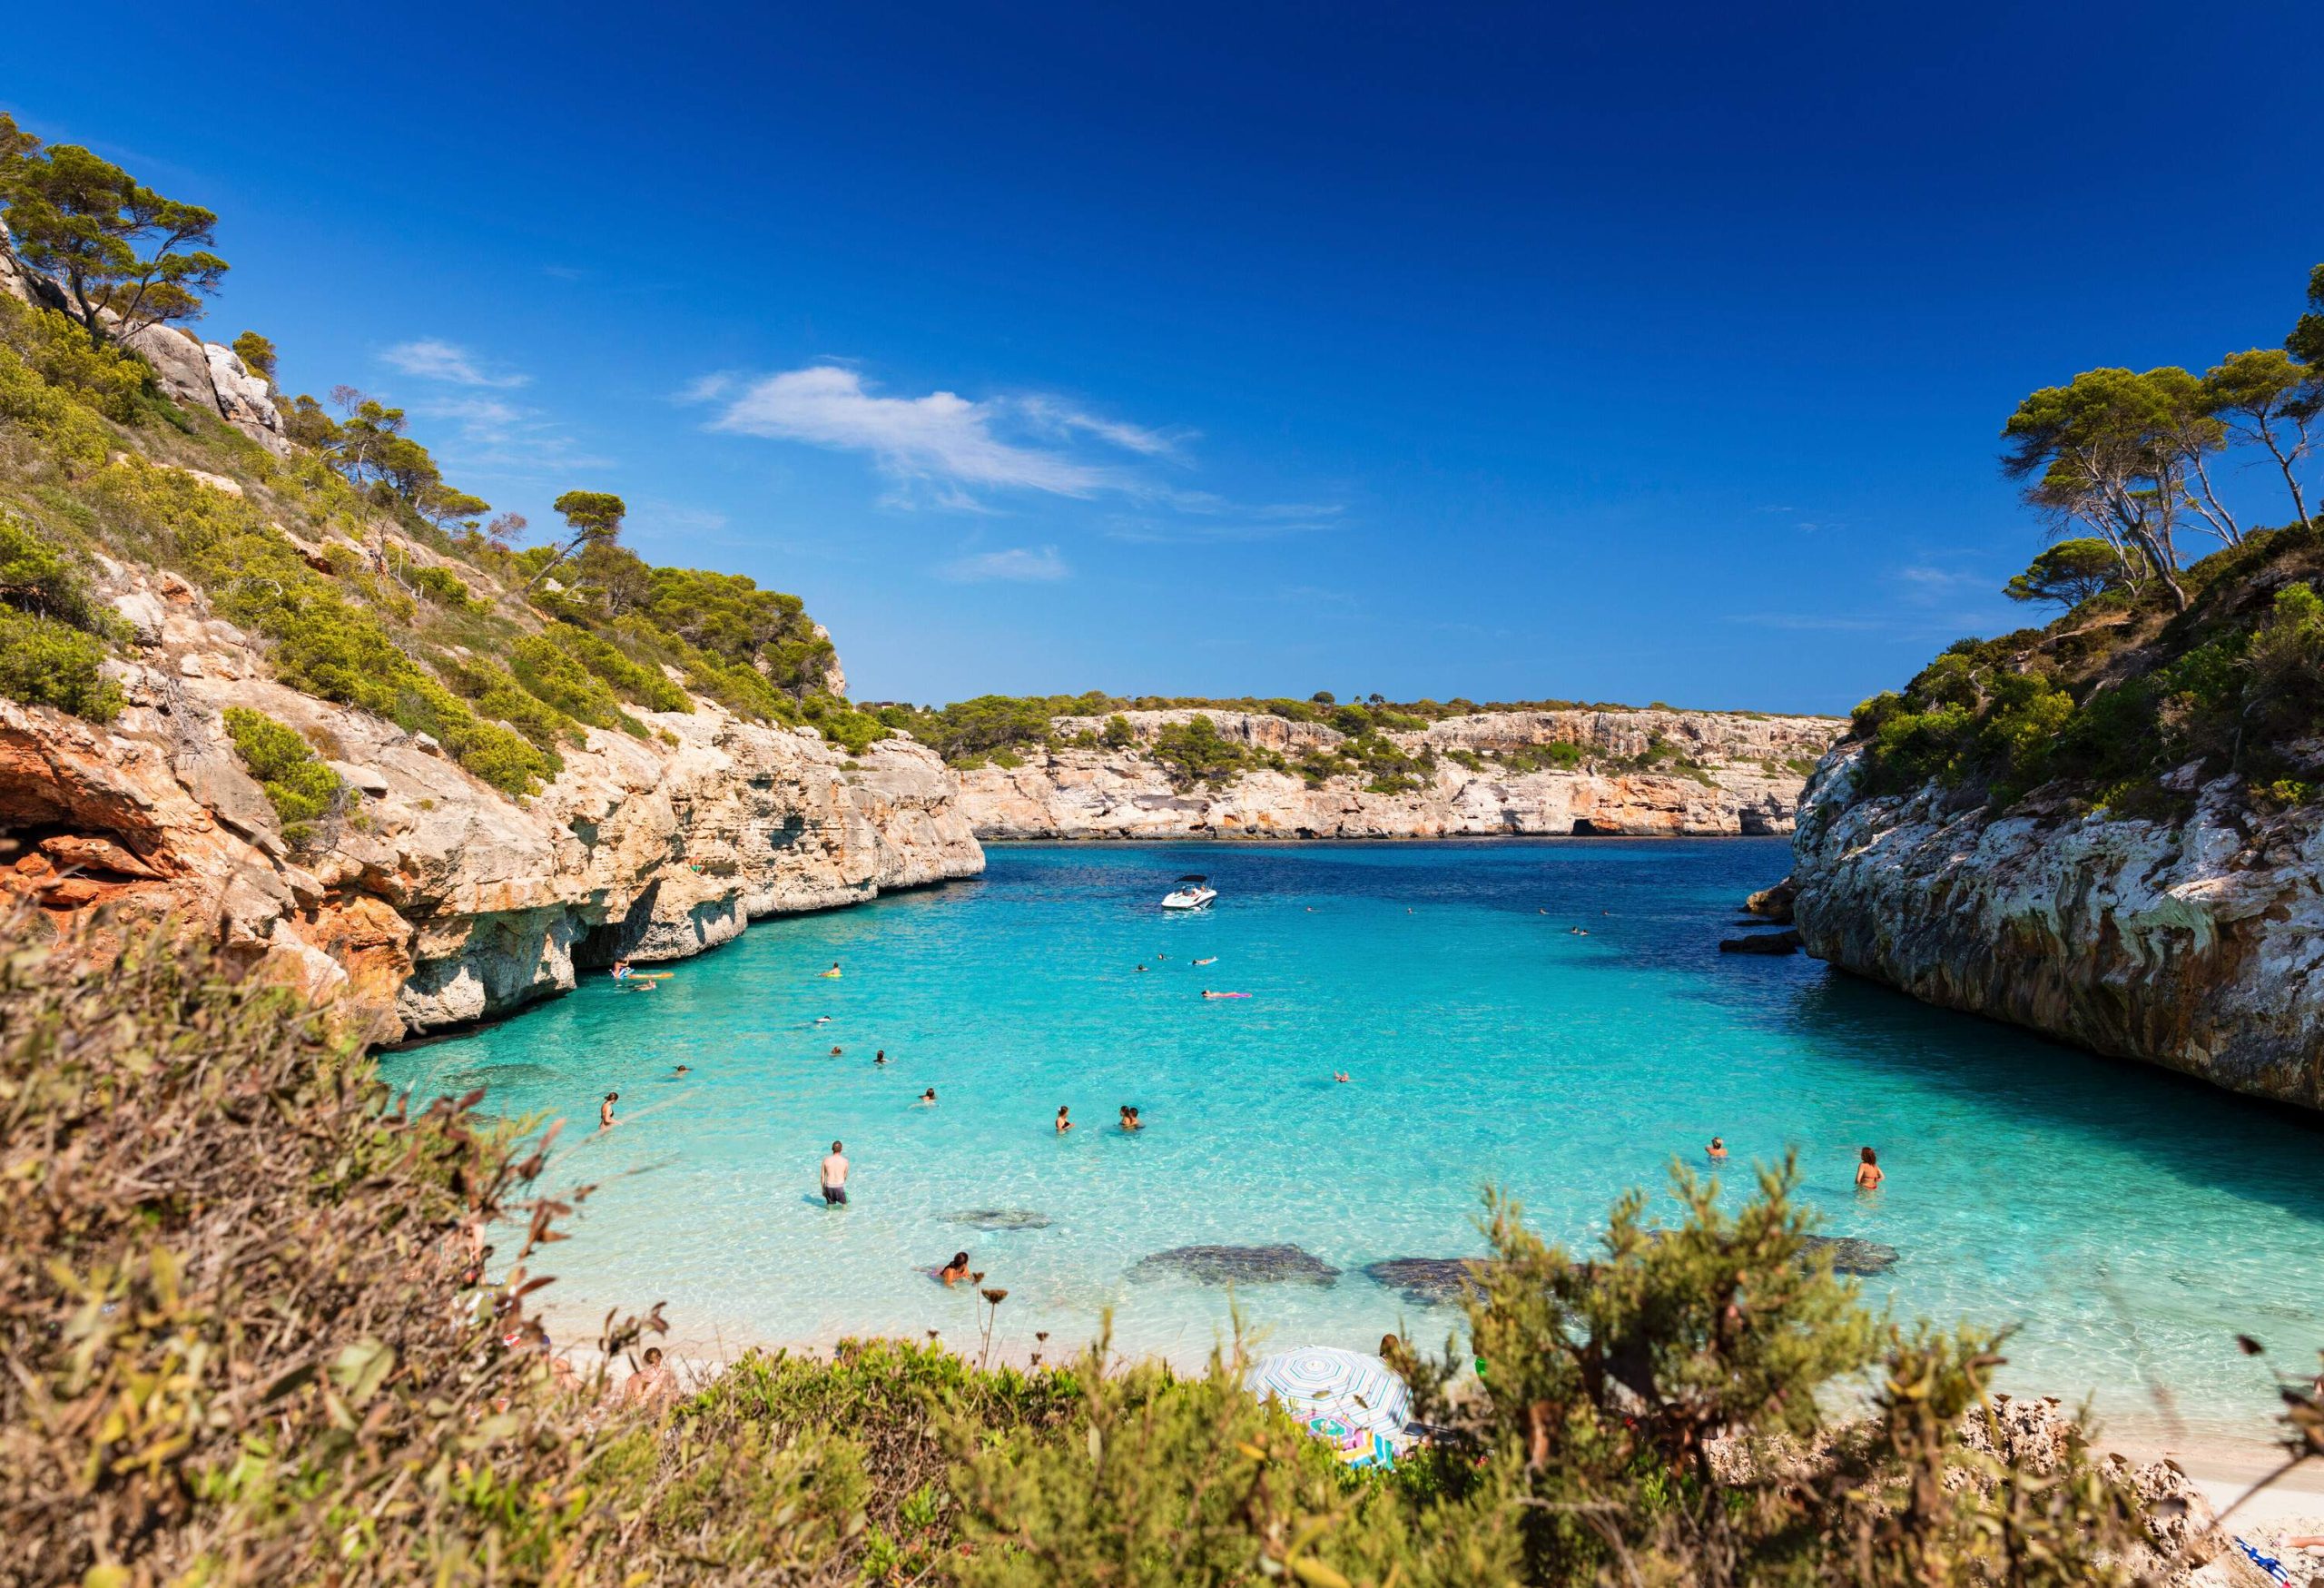 People enjoy the calm crystal clear turquoise waters along the rocky cliffs.